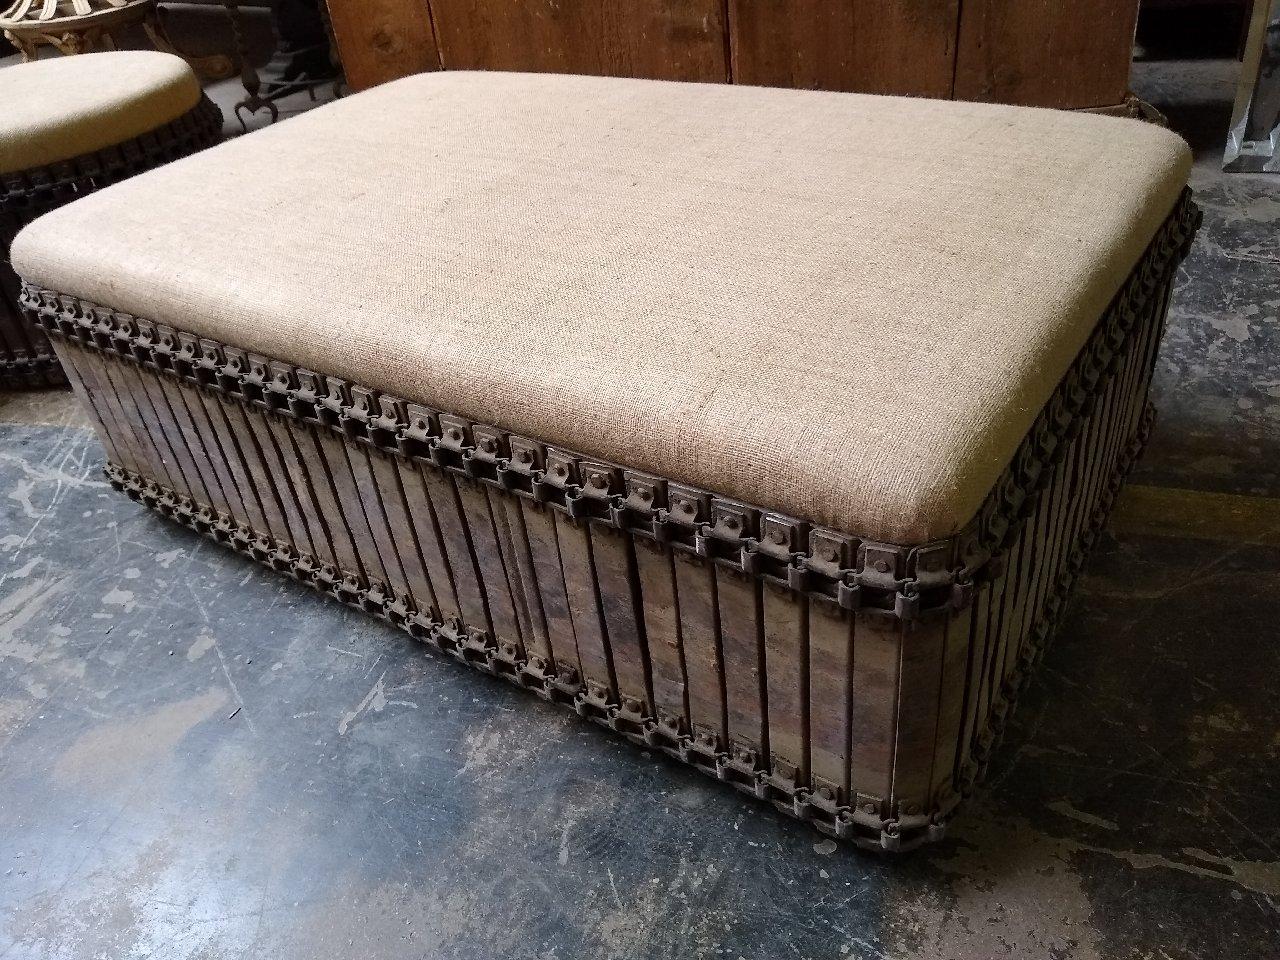 We started making our Rust Belt Ottoman series, designed by Joann Westwater, a few years ago. Most have been round, and on casters, but we were inspired to do a larger piece as a coffee table. The old metal belts have a wonderful variation of color,